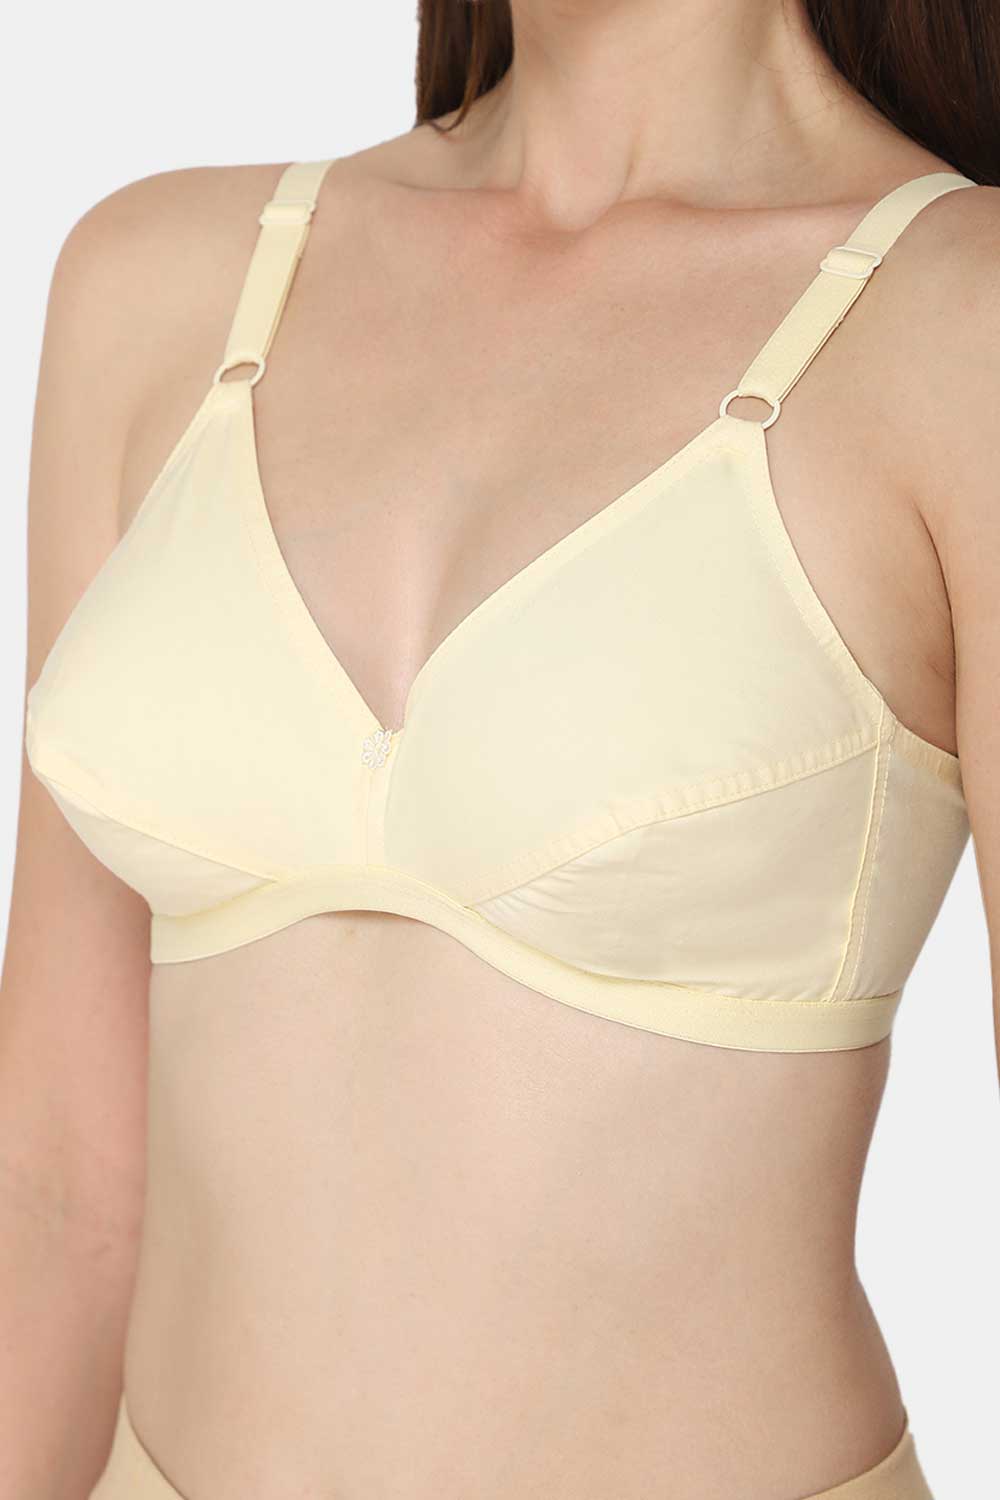 RPB Bra at best price in Chennai by Naidu Hall The Family Store